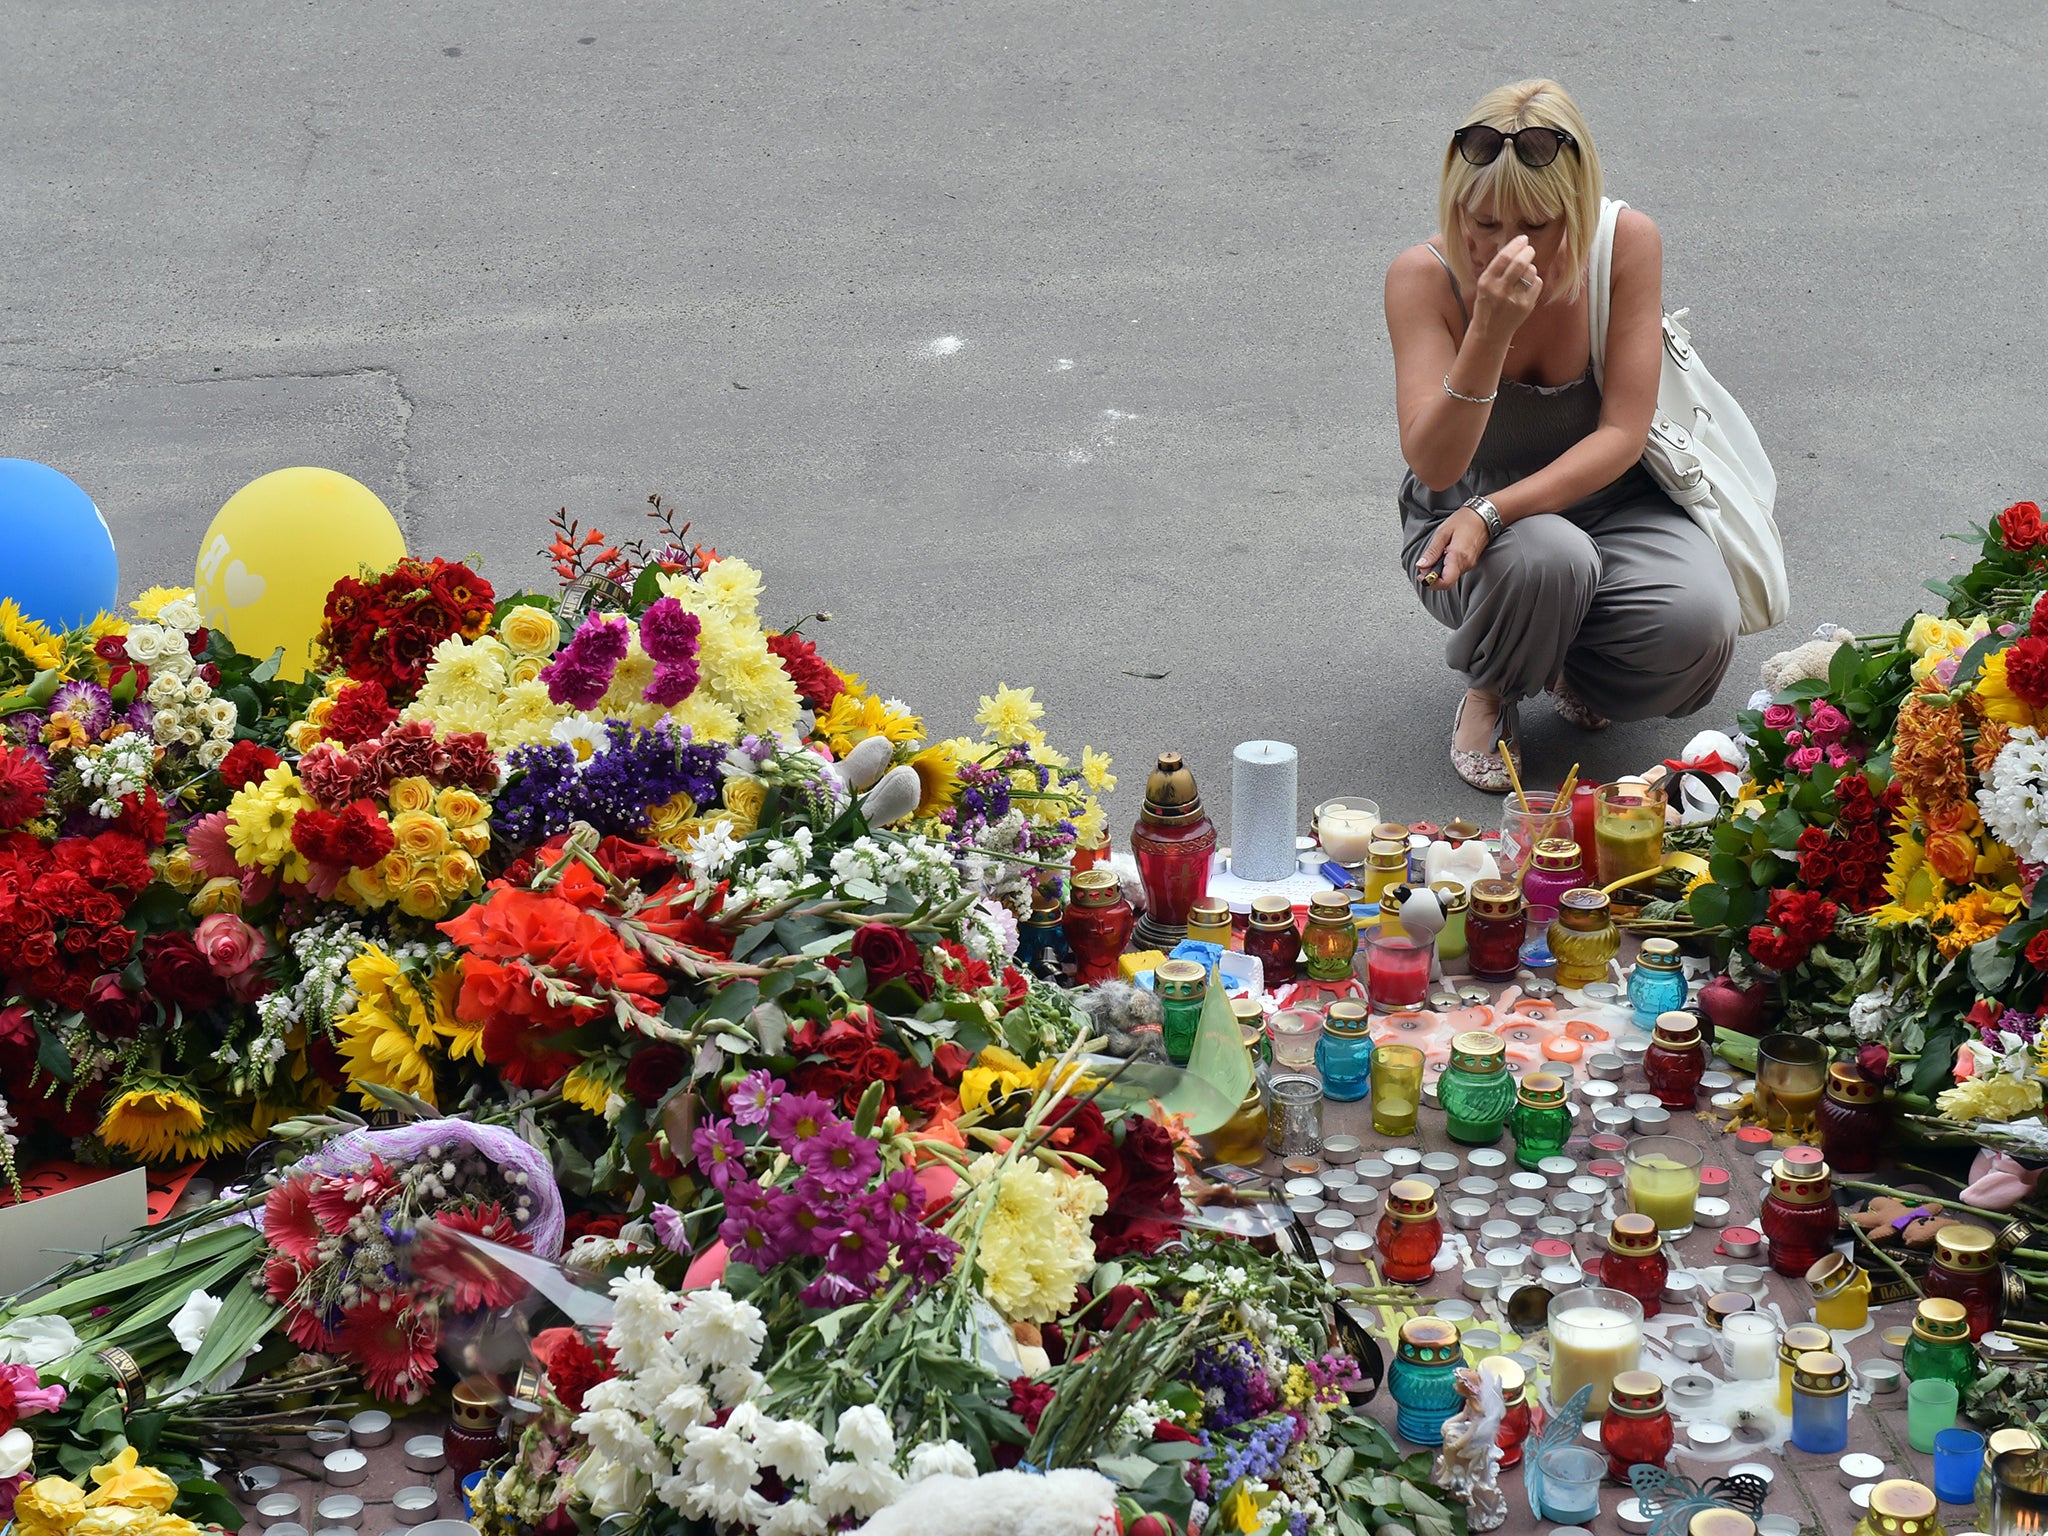 A woman crosses herself as people lay flowers and light candles in front of the Embassy of the Netherlands in Kiev, to commemorate passengers of Malaysian Airlines flight MH17 carrying 295 people from Amsterdam to Kuala Lumpur which crashed in eastern Ukr